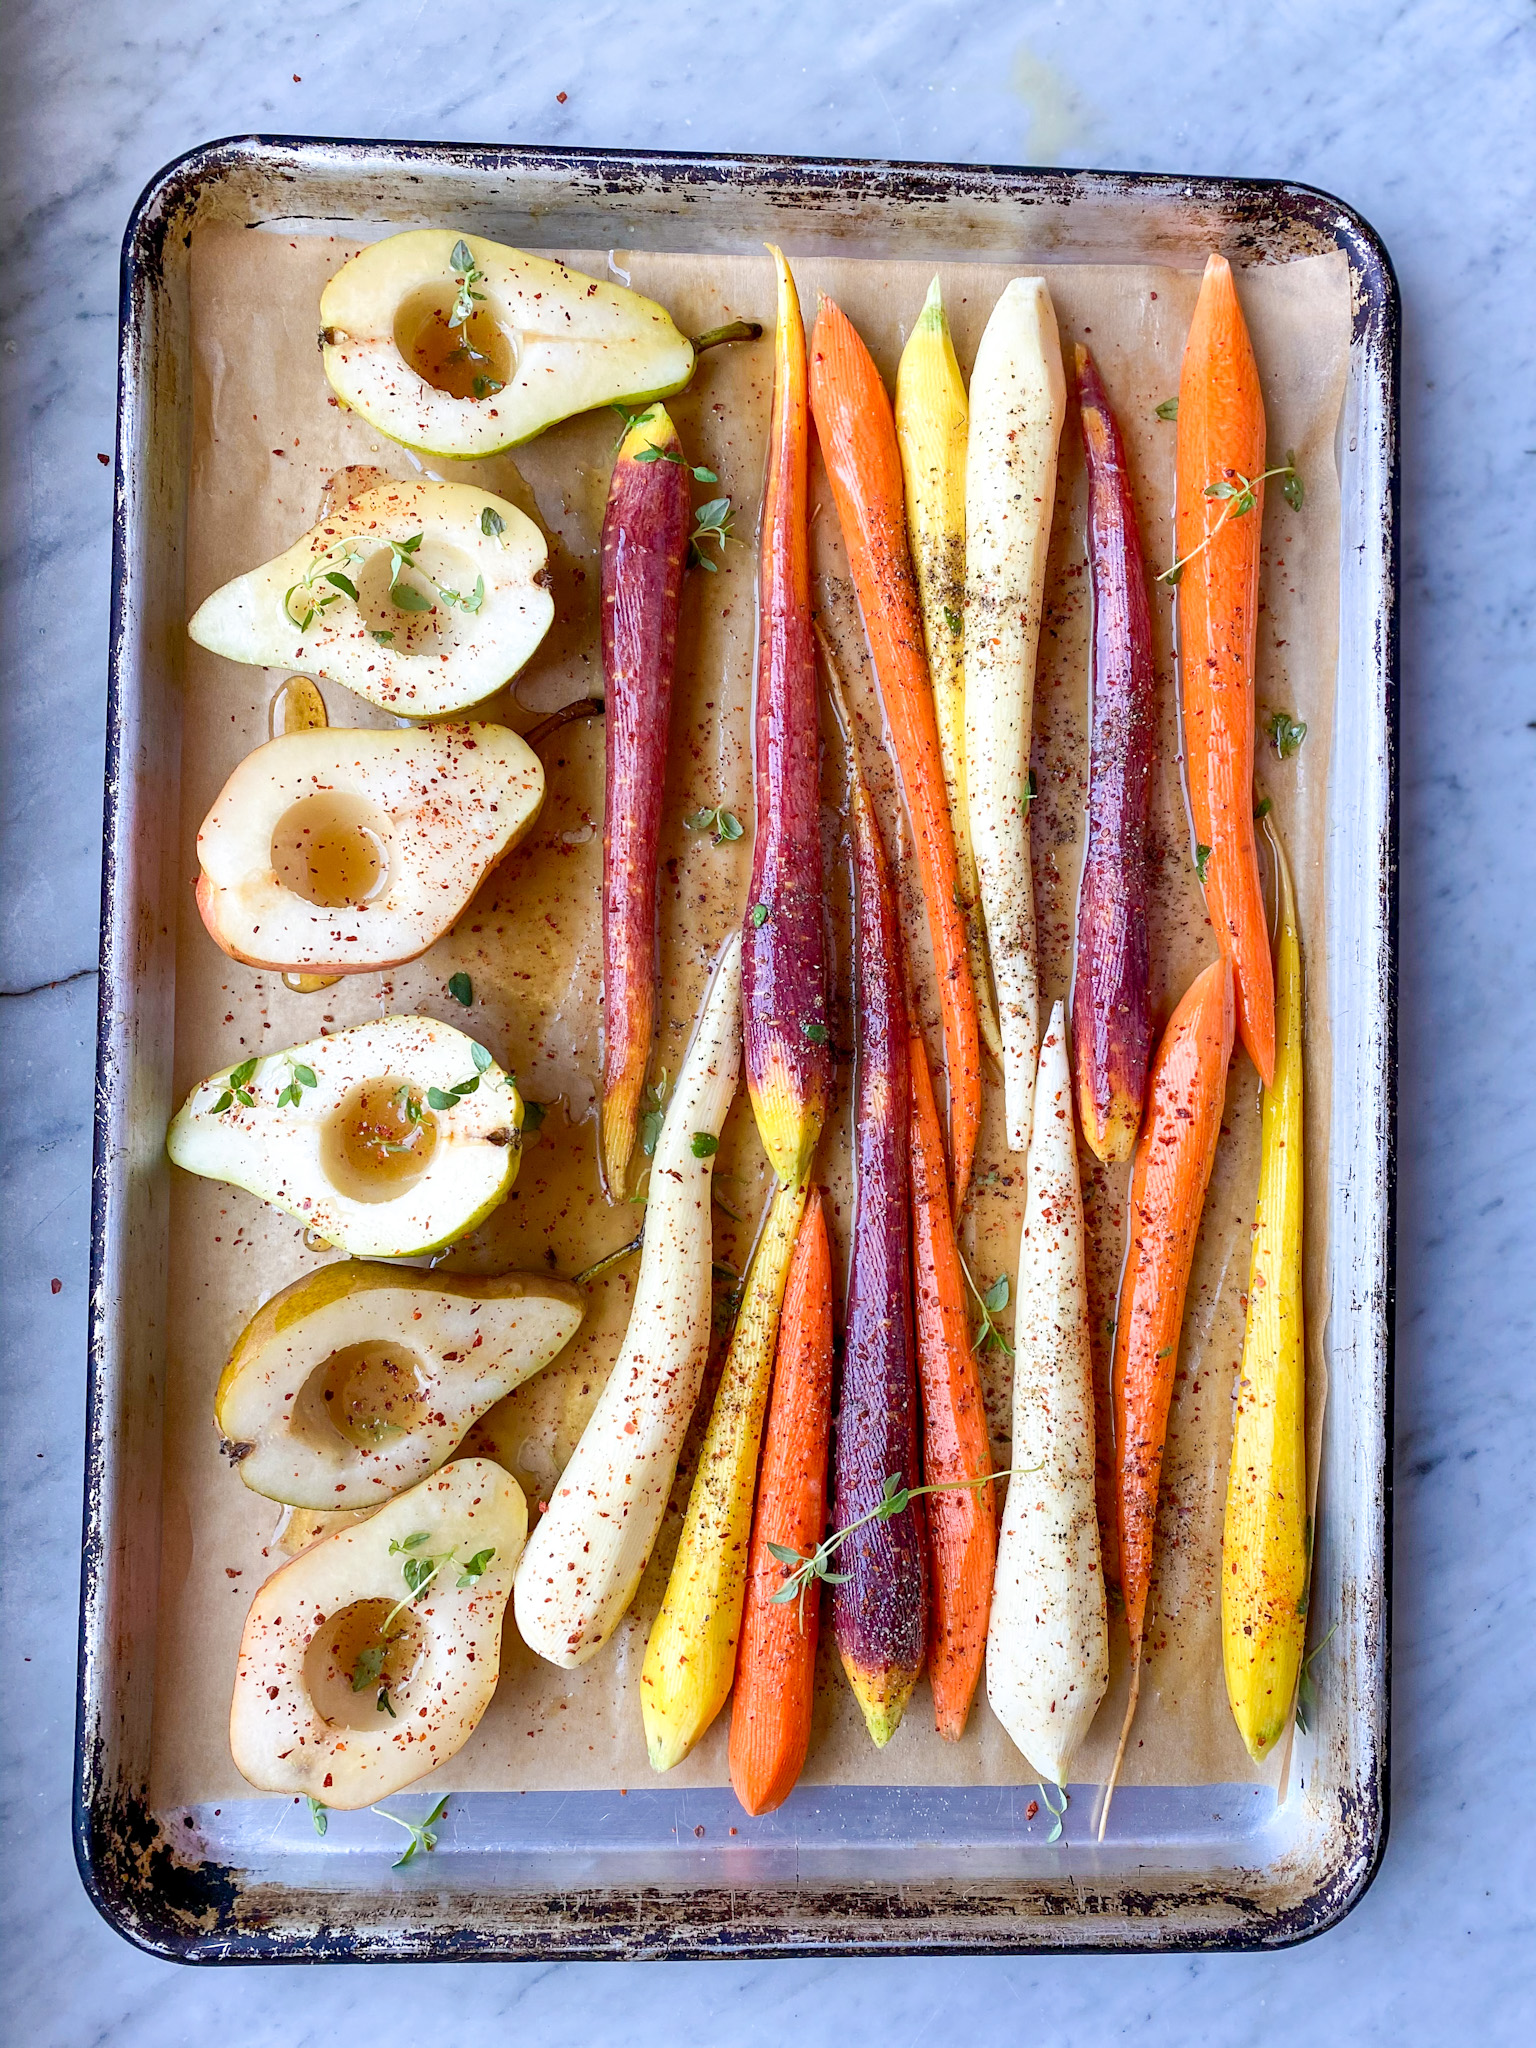 Carrots and pears on sheet pan ready to bake